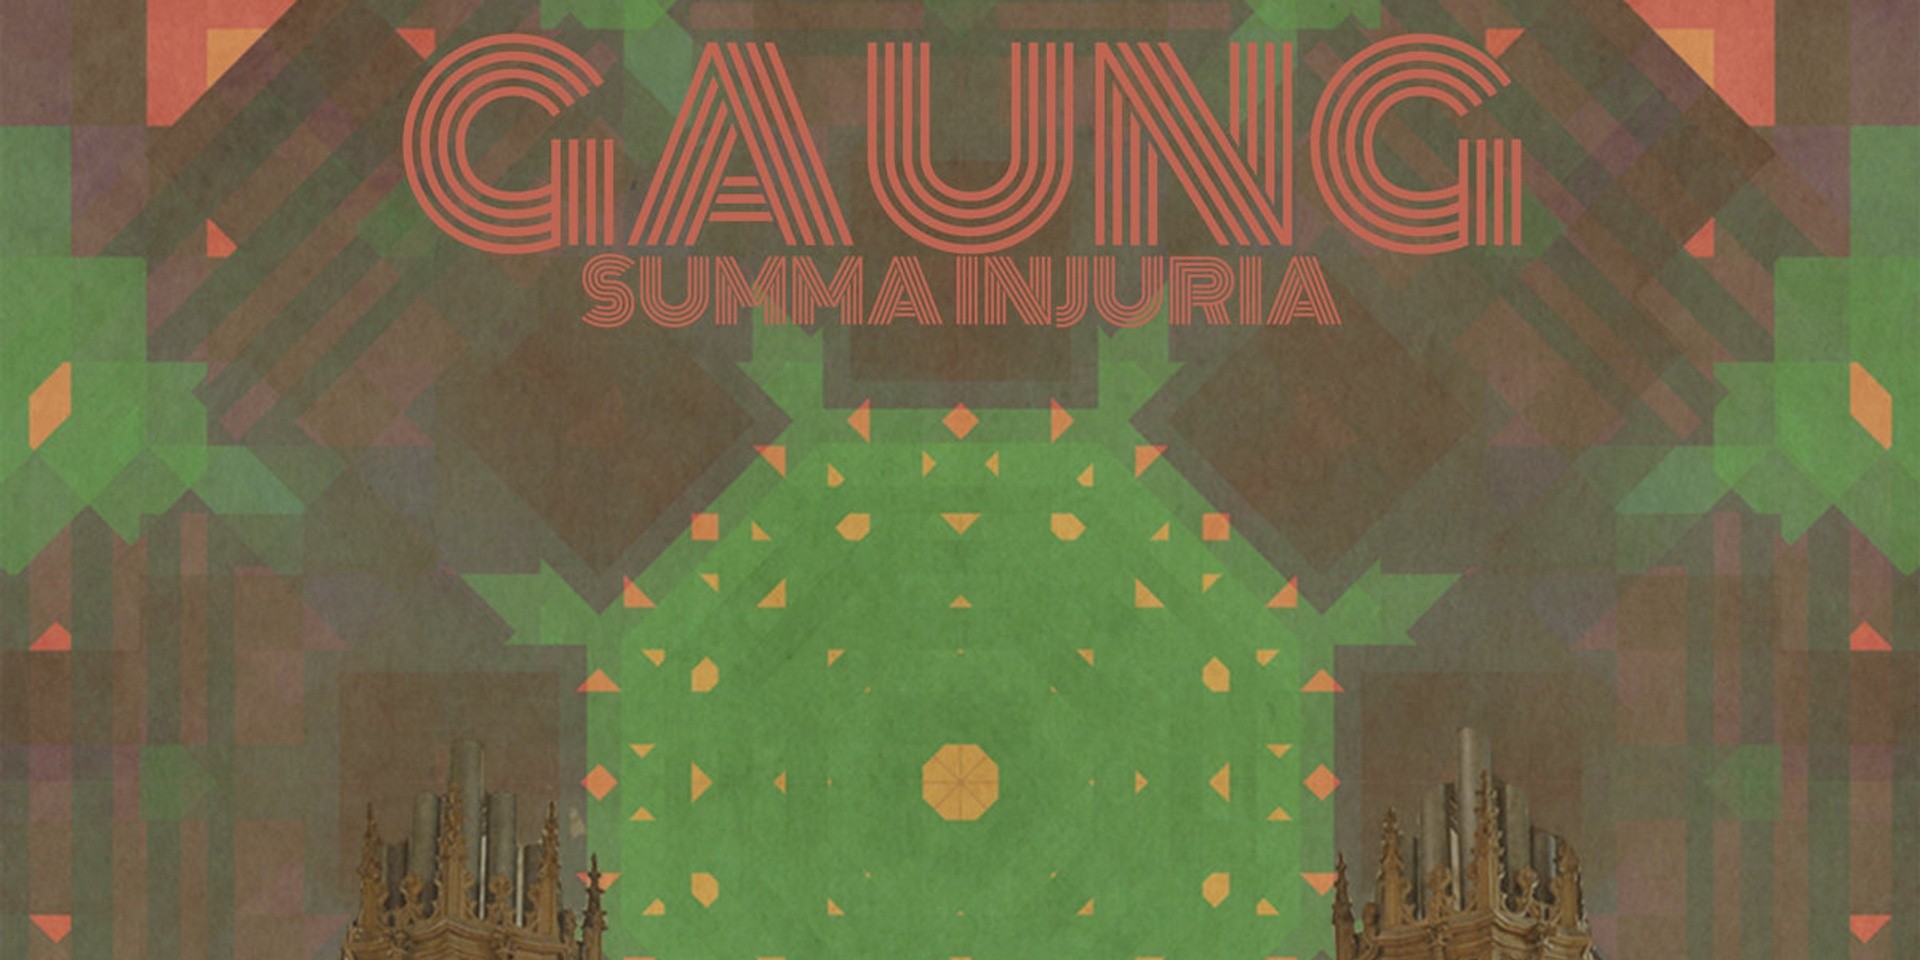 Gaung teases forthcoming debut album with latest single 'Summa Injuria'—listen